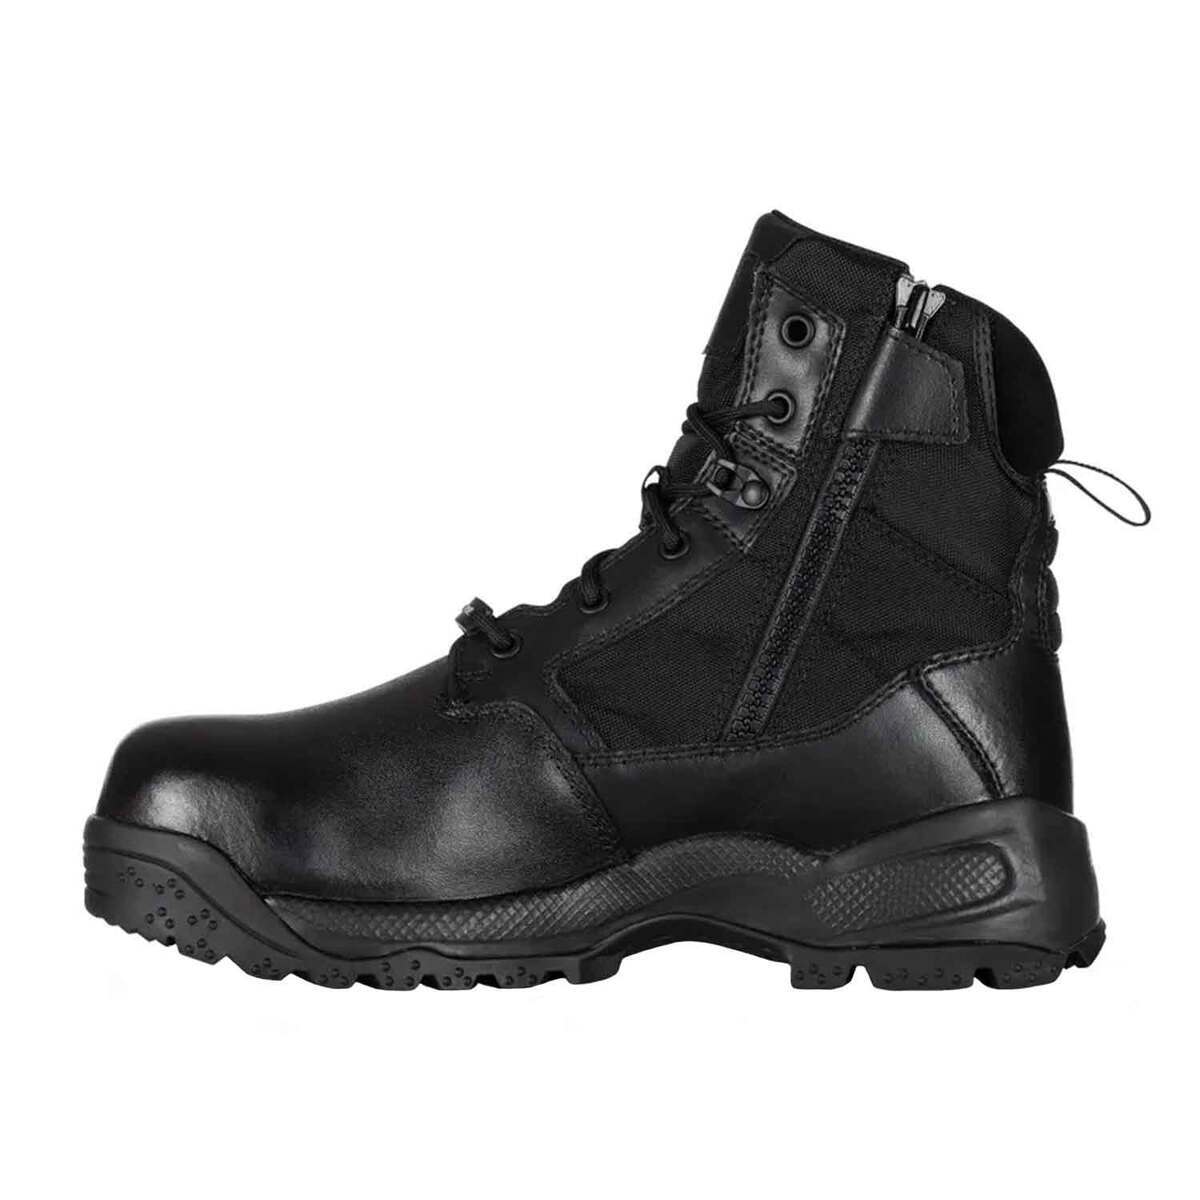 5.11 Men's A.T.A.C Shield 2.0 6in Tactical Boots | Sportsman's Warehouse